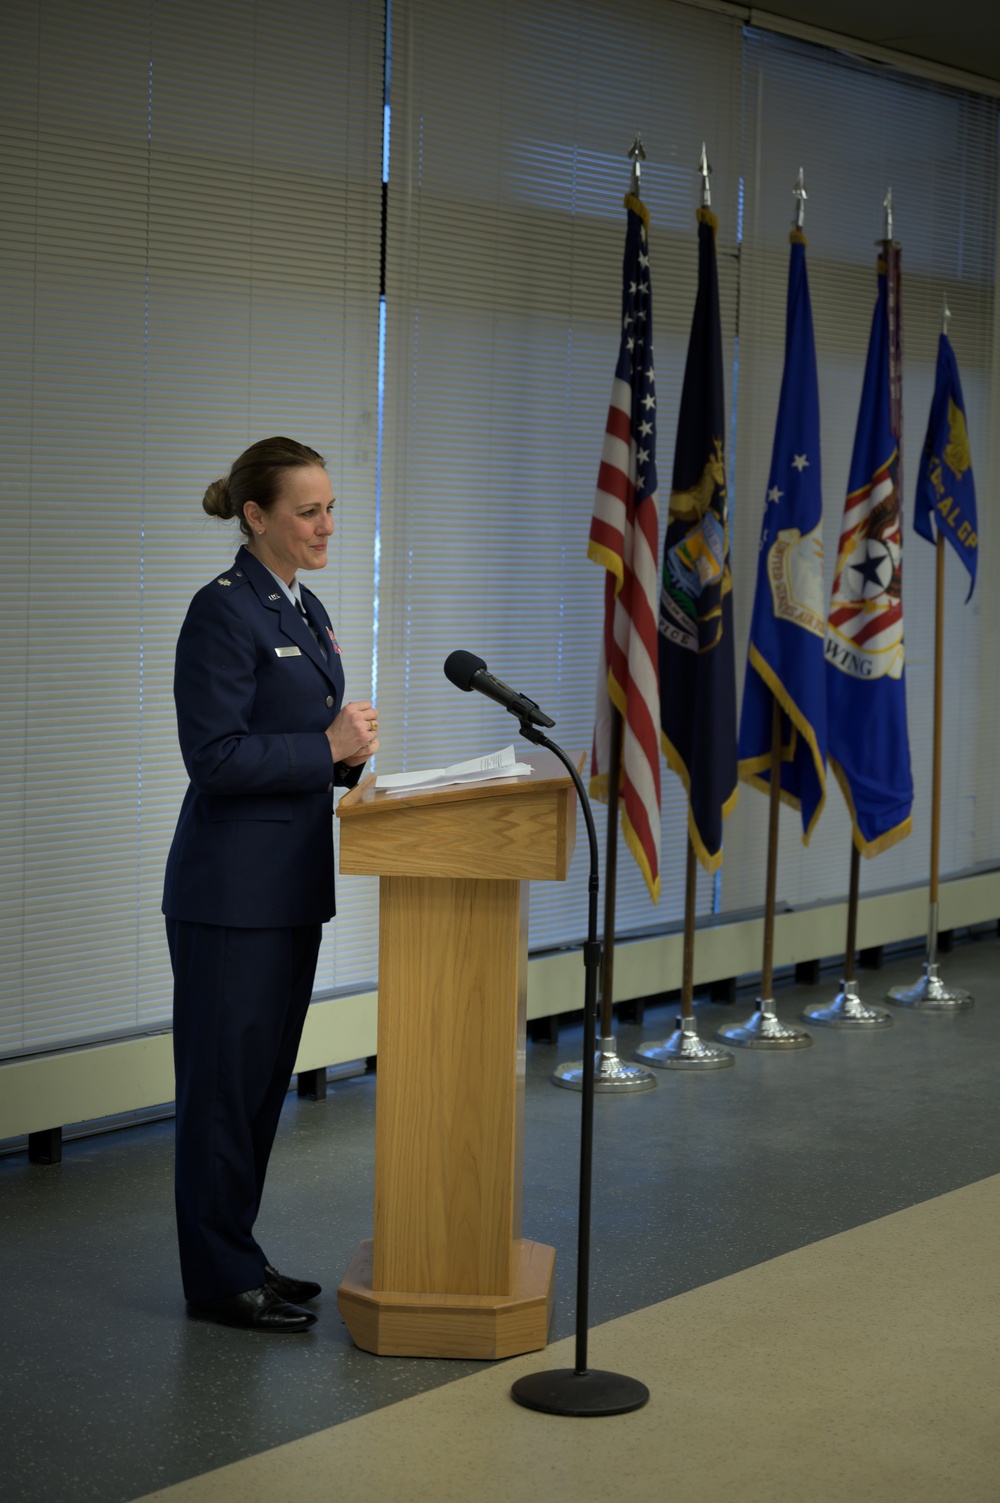 Lt. Col. Davis Assumes Command of the 110th Medical Group